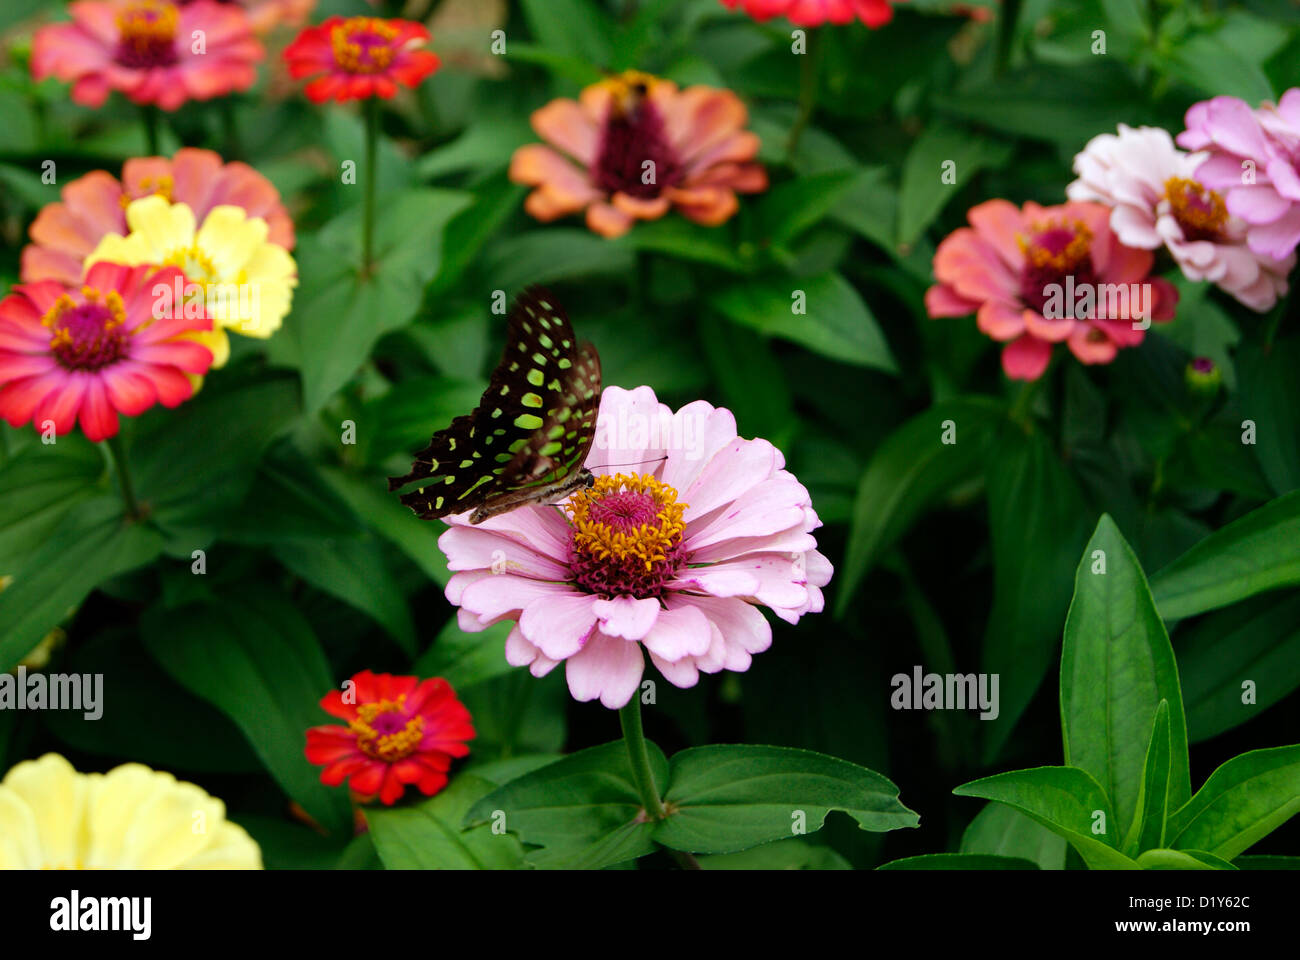 butterfly on flower garden at kerala india stock photo: 52843236 - alamy